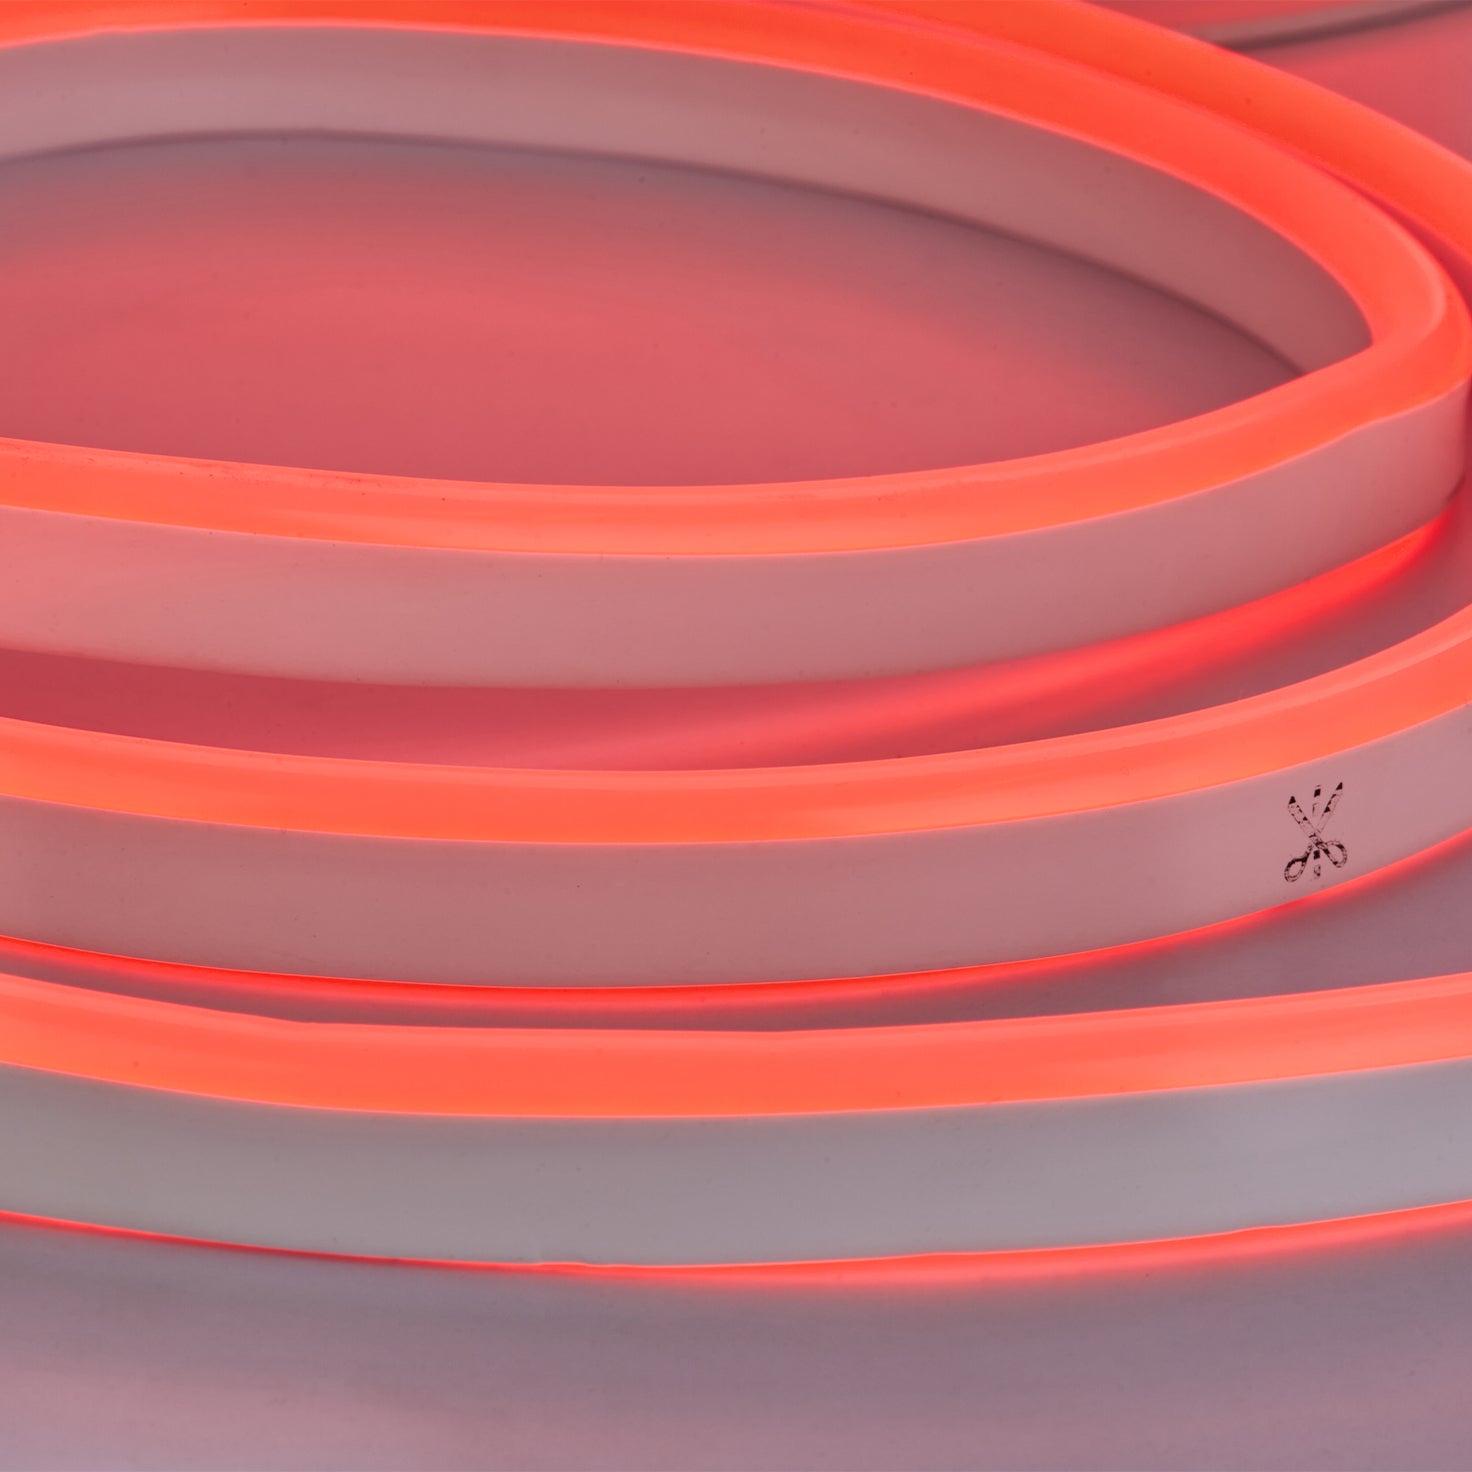 LED Flexible Neon Rope Light | 164 Watt | RED | 120V | 50 Feet | Includes Clips, Connectors & AC Powered KIT | IP67 | ETL Listed | 2 Year Warranty - Nothing But LEDs